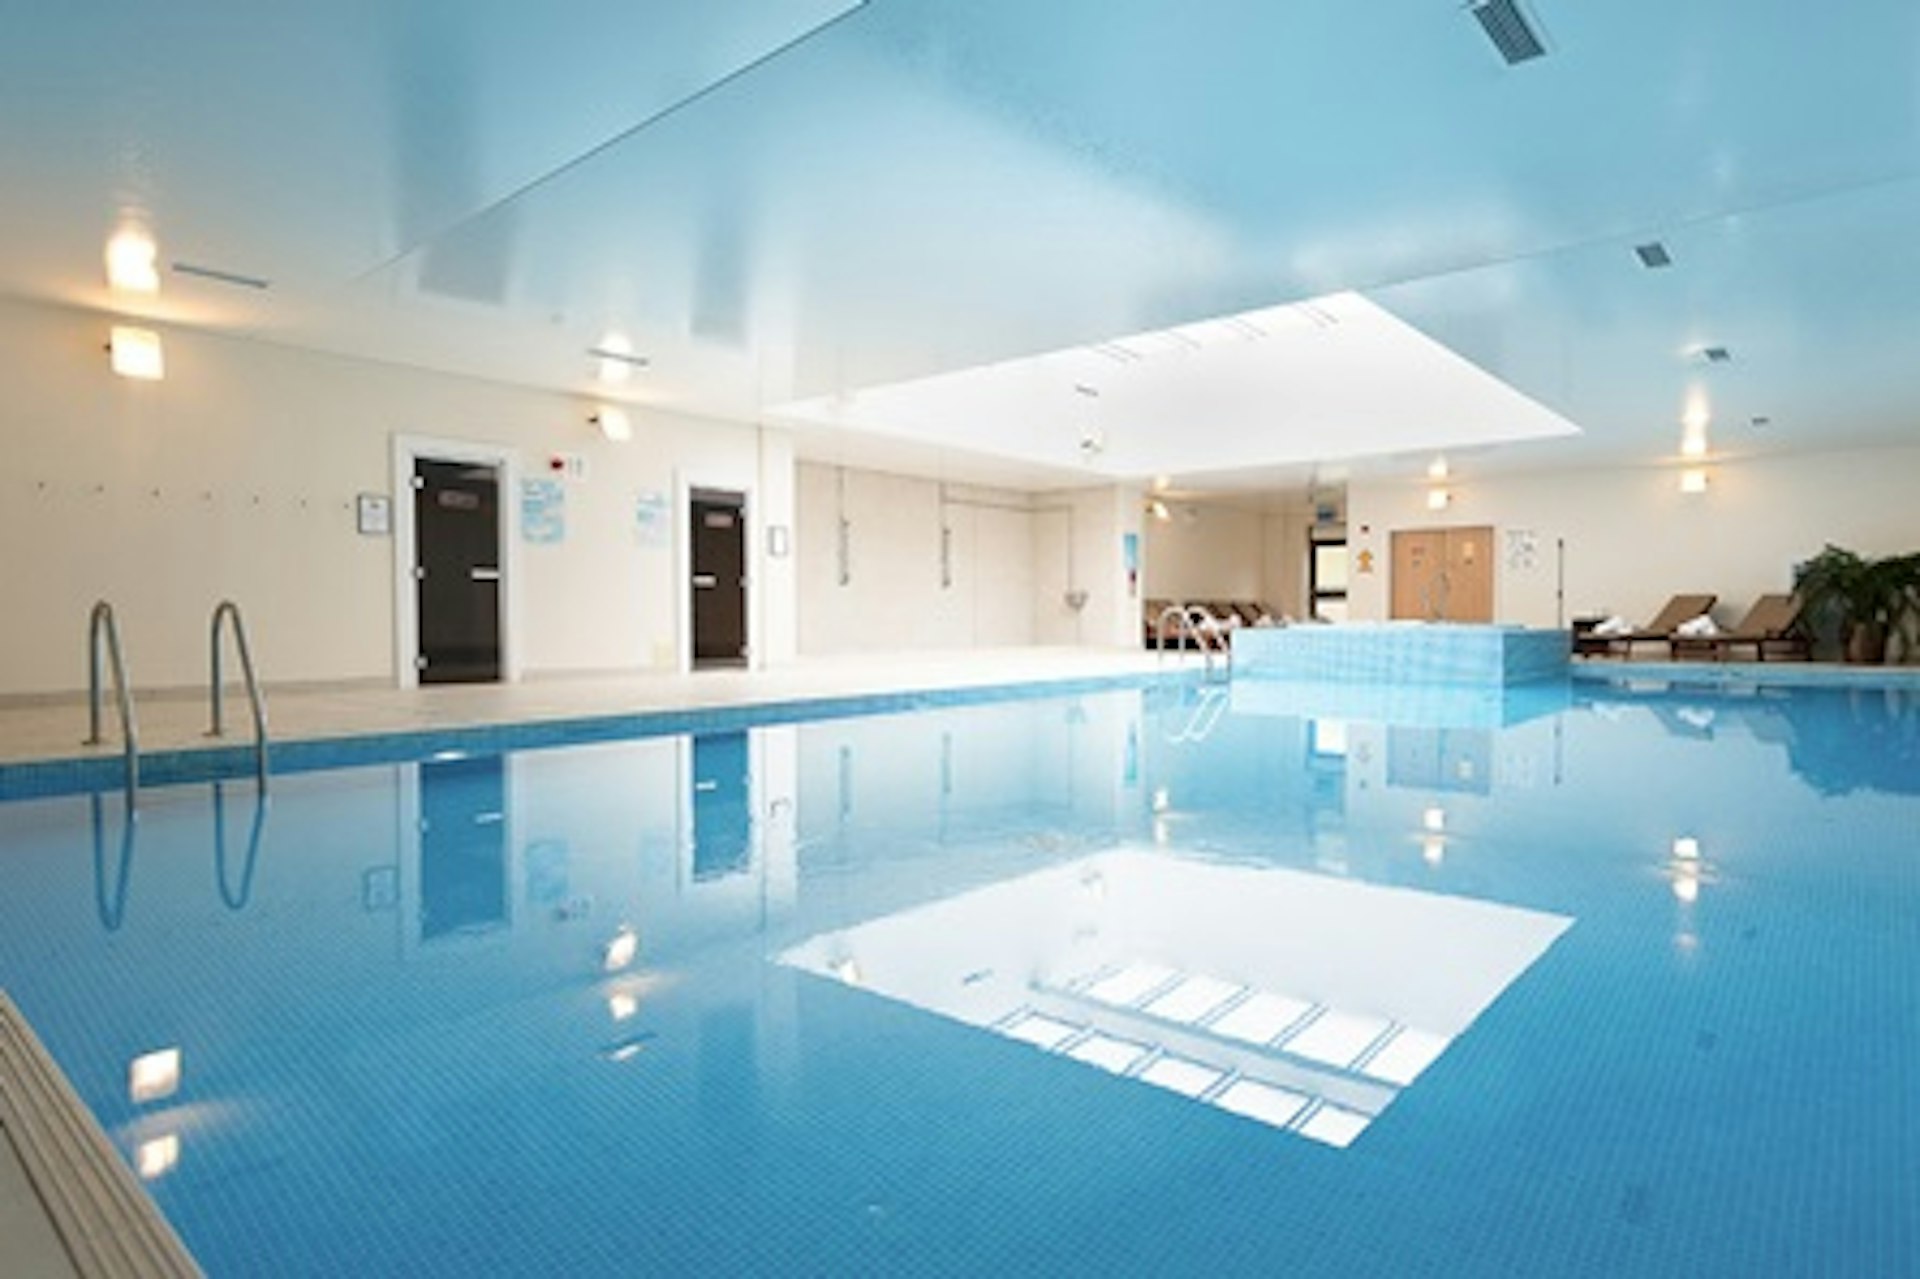 Spa Treat with Mediterranean Body Scrub, Massage and Lunch for Two at The Oxfordshire Hotel & Spa 4